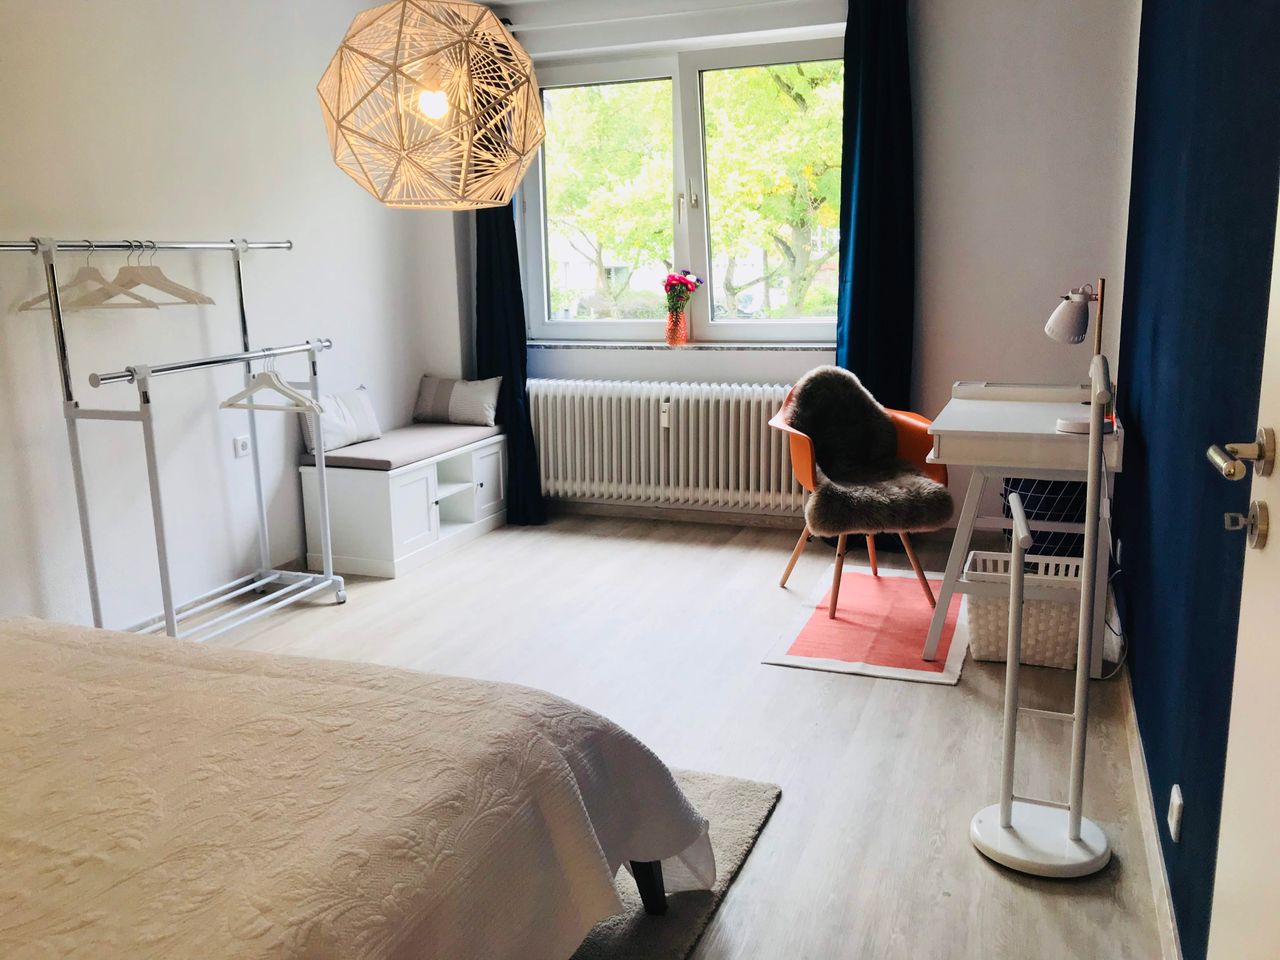 Modern & spacious studio located in the heart of Essen